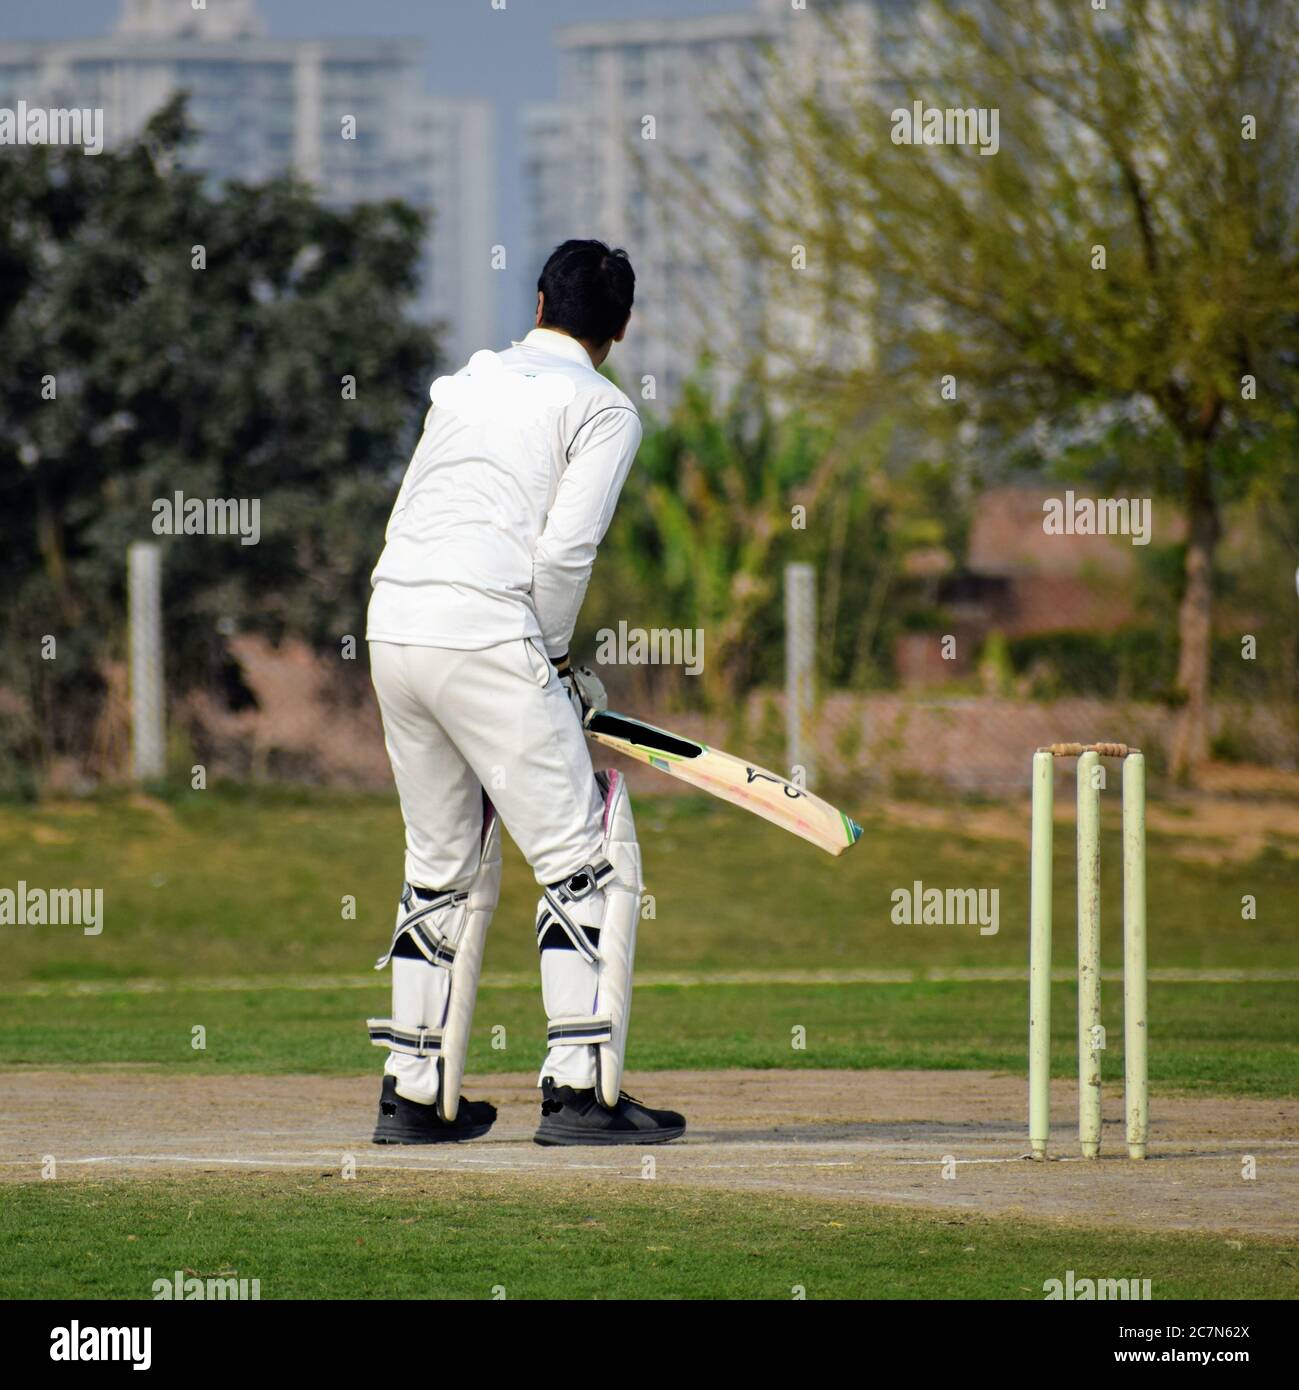 Full length of cricketer playing on field during sunny day, Cricketer on the field in action, Players playing cricket match at field during the day ti Stock Photo